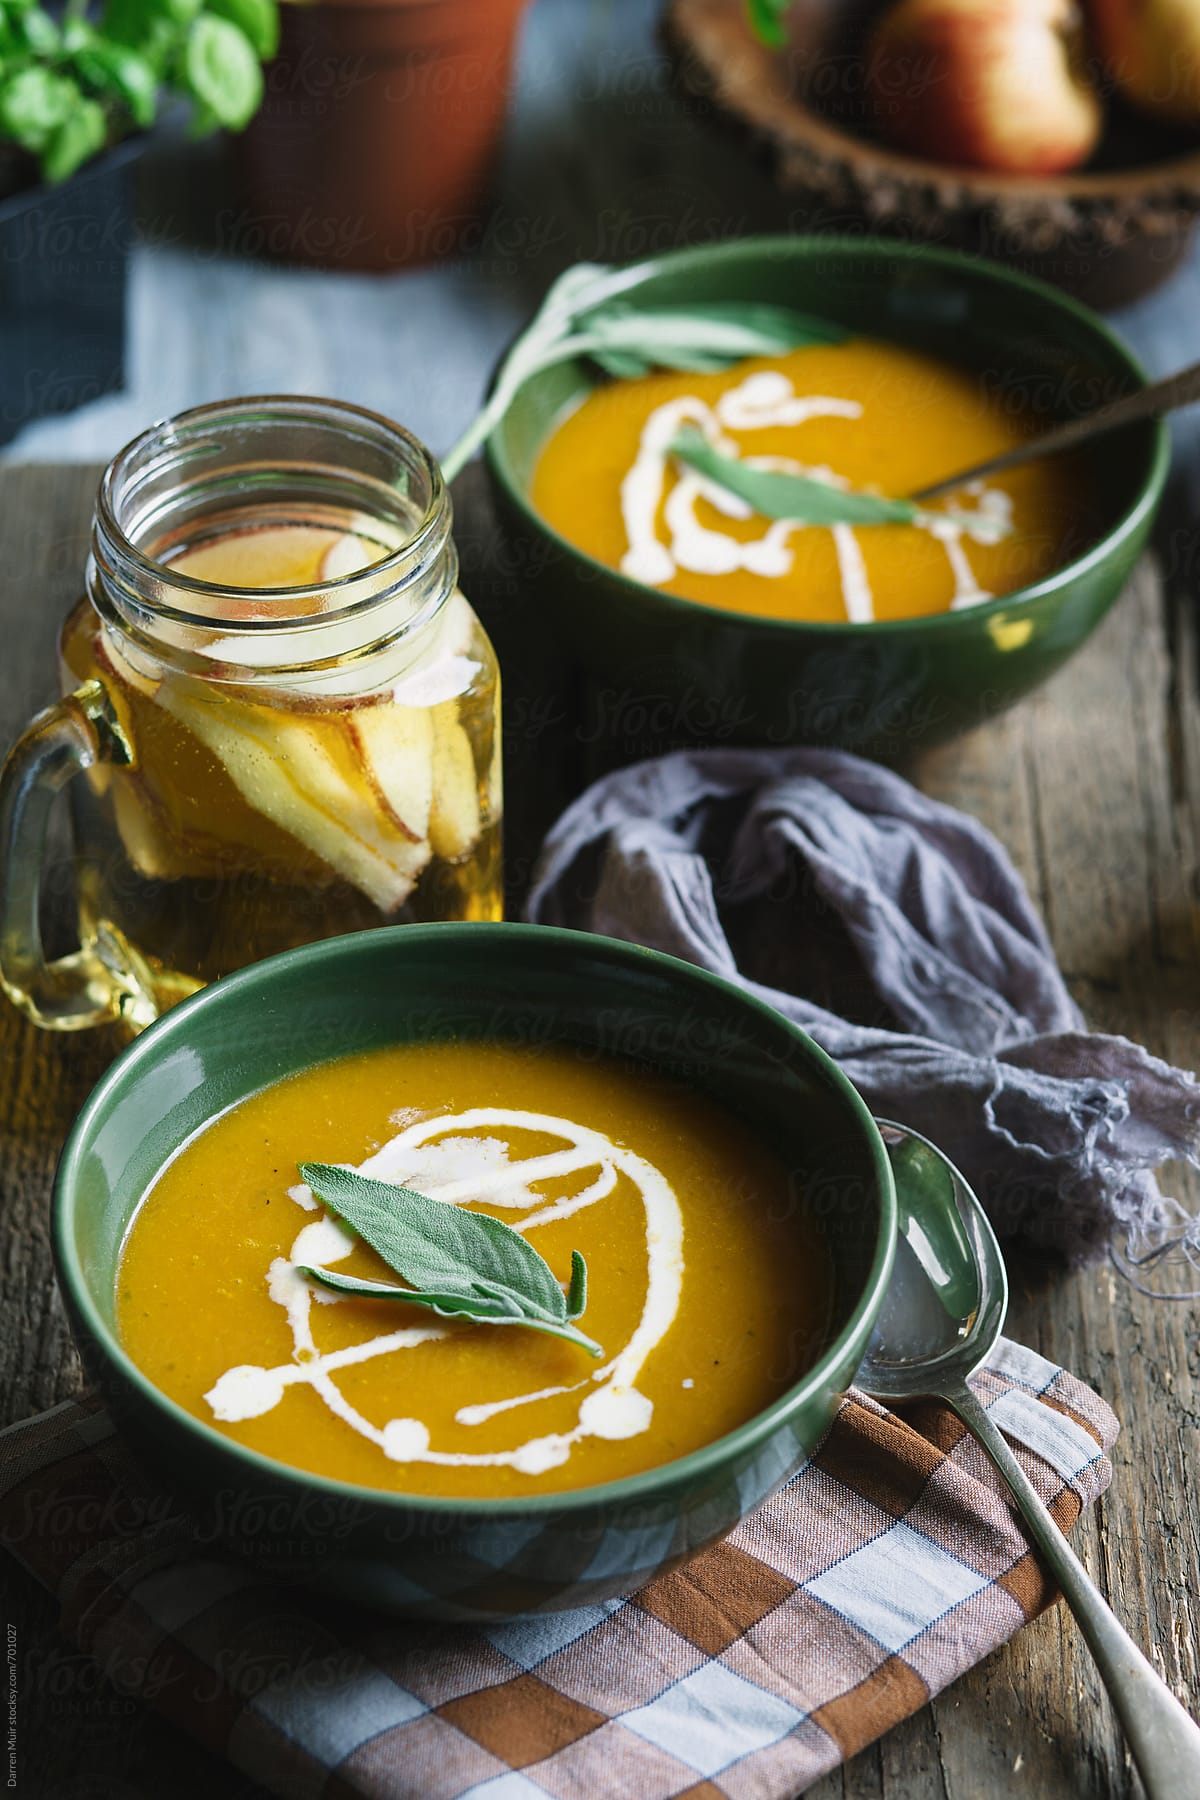 Two servings of butternut squash soup and a jug of cider on a table.